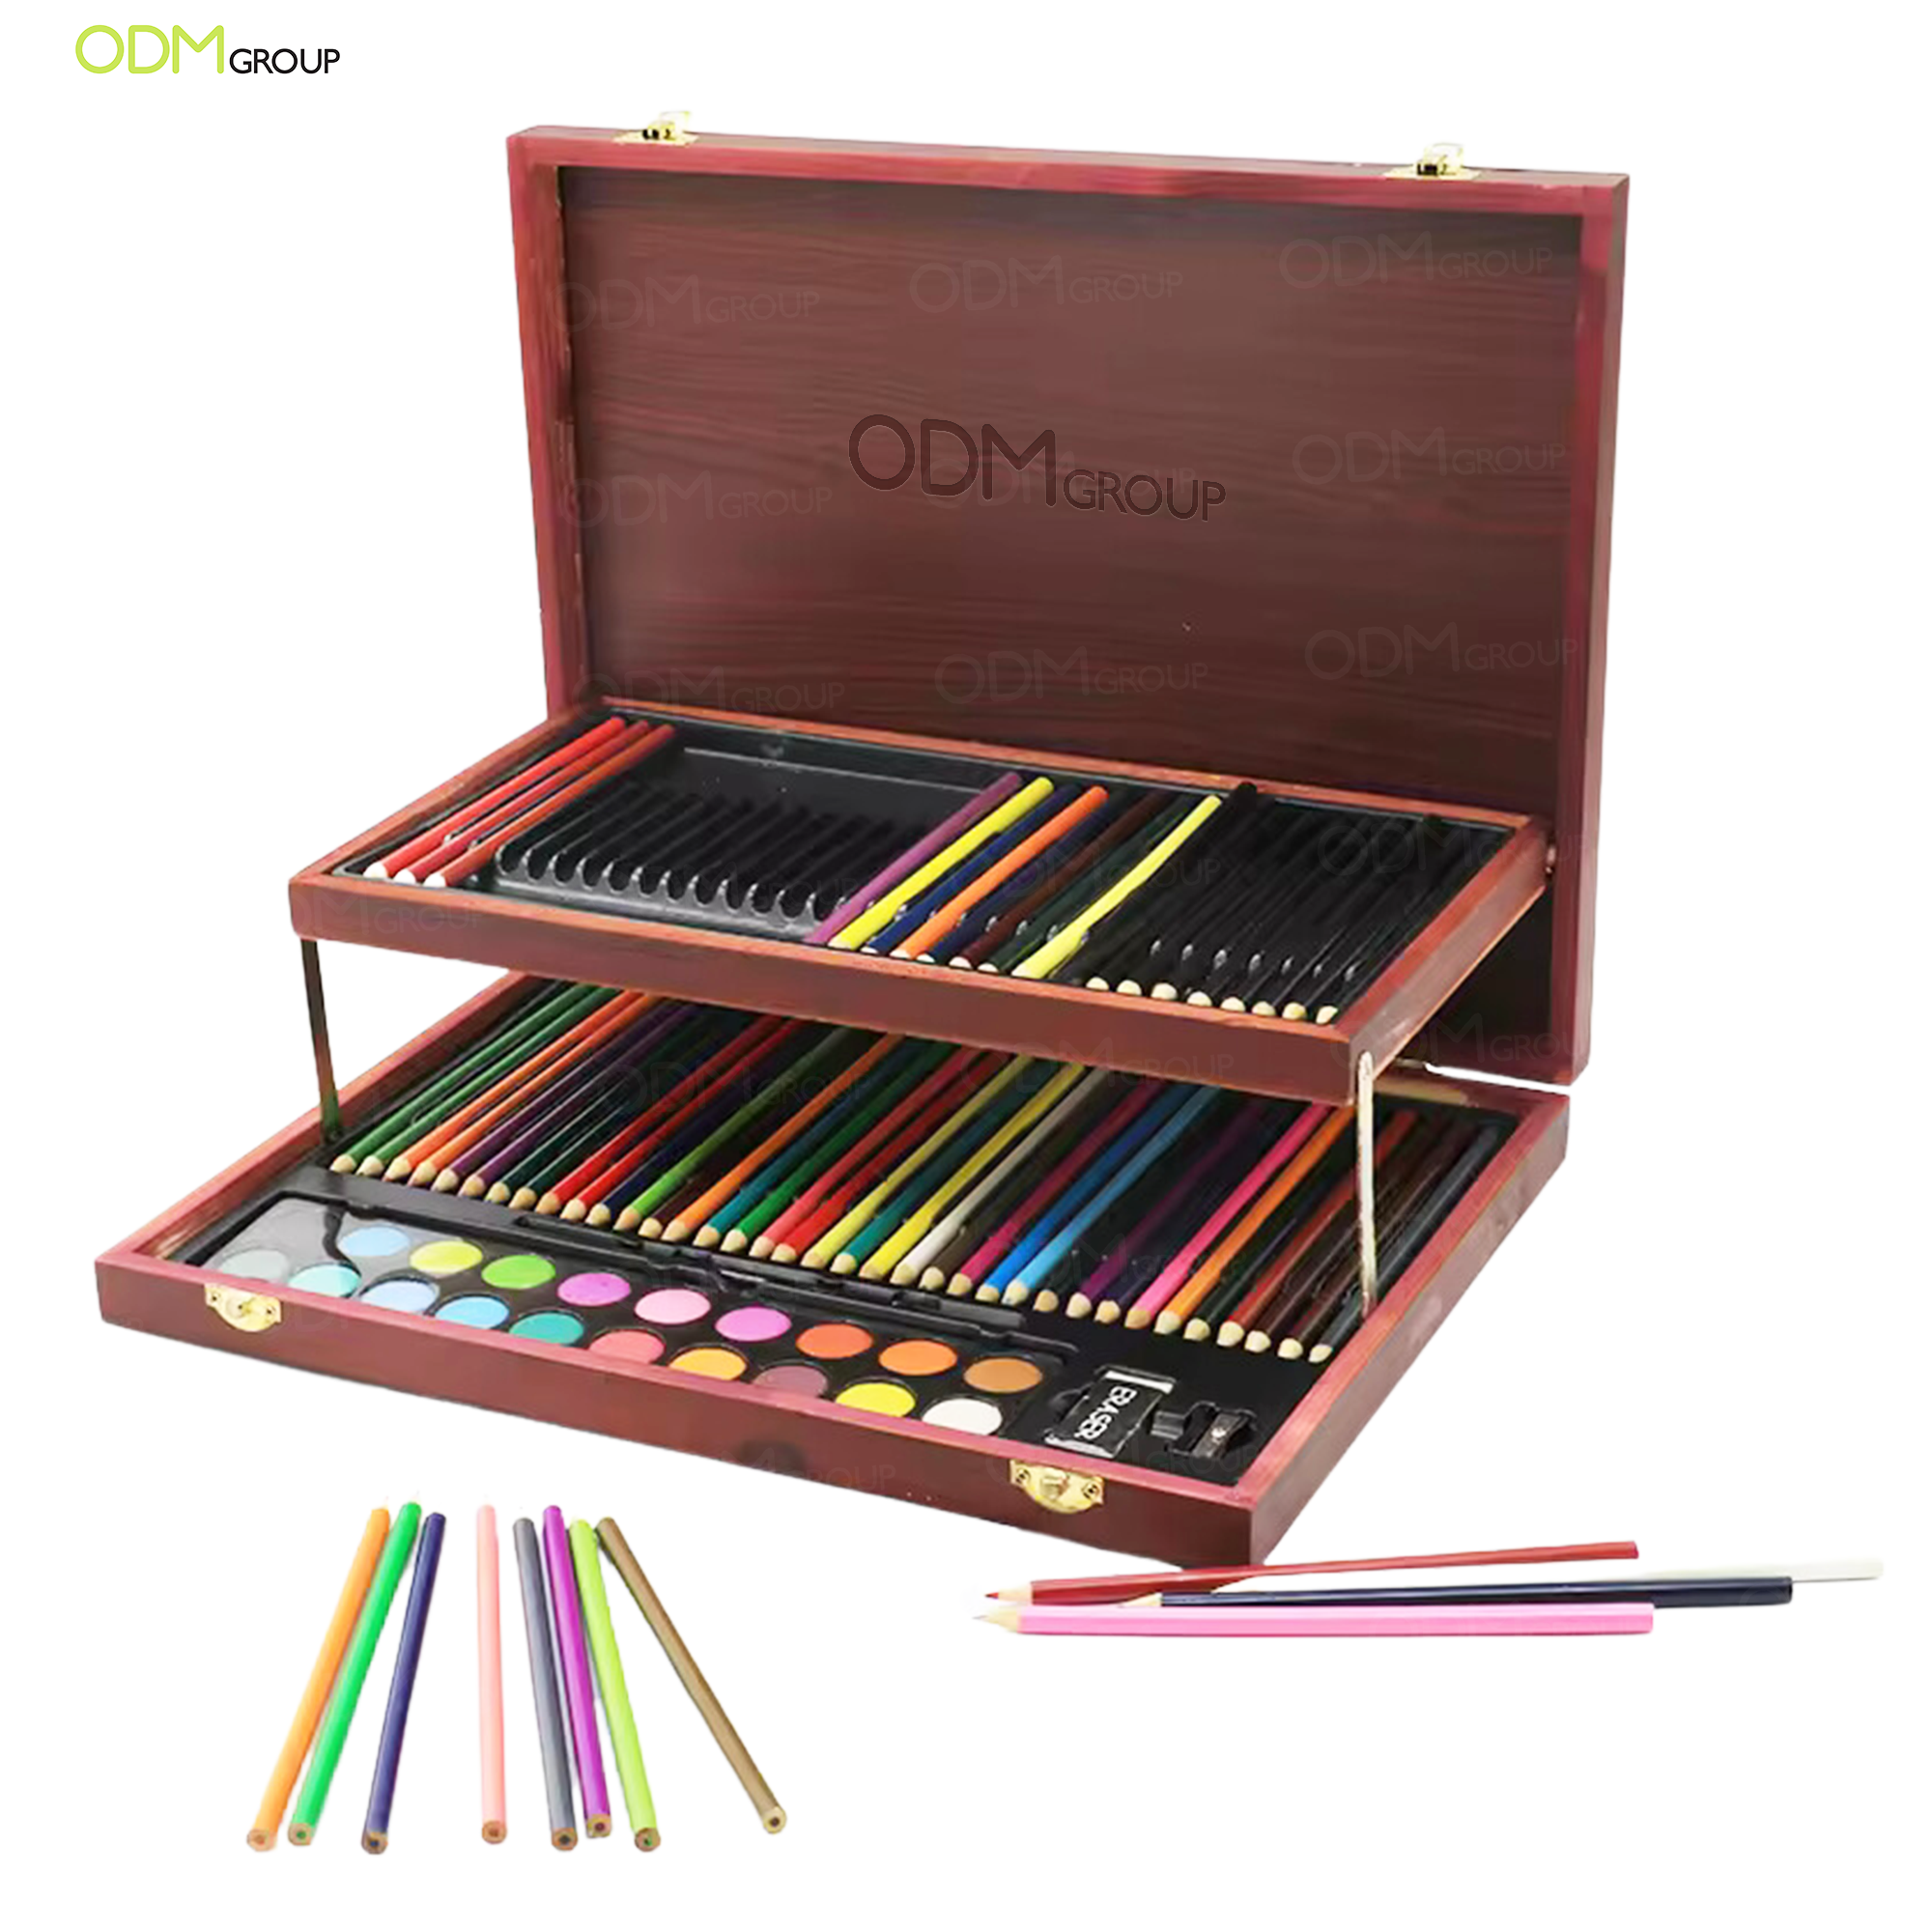 Wooden case with assorted color pencils and paint set.